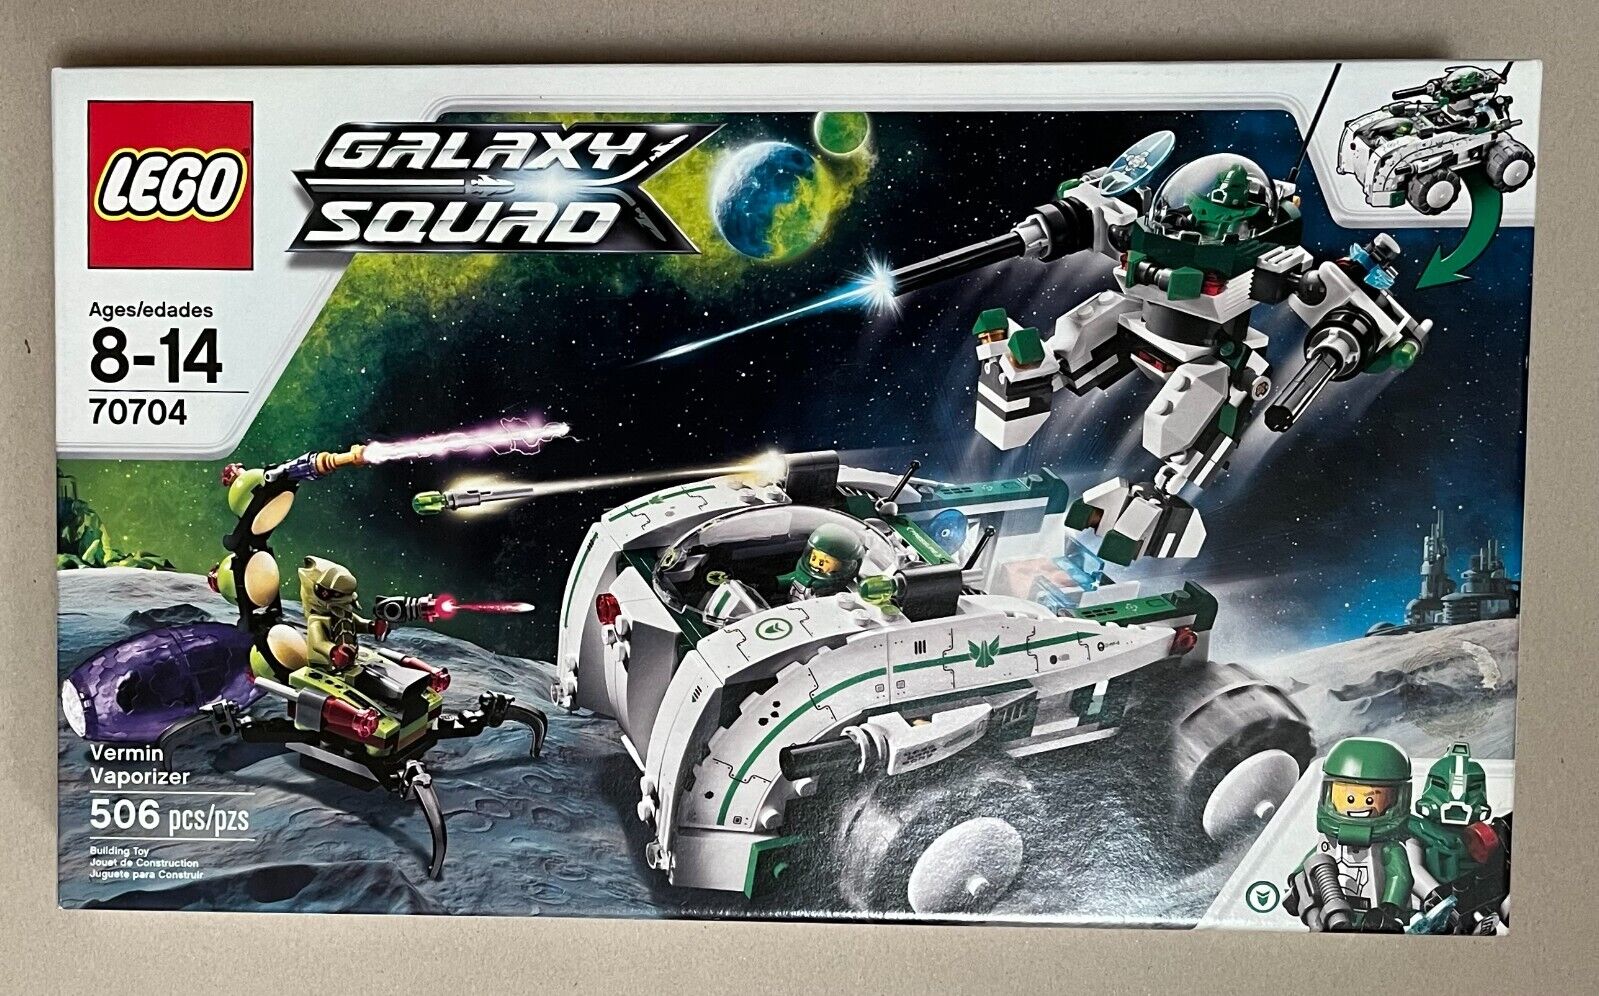 *NEW* Lego 70704 Galaxy Squad Vermin Vaporizer -Factory Sealed- RETIRED